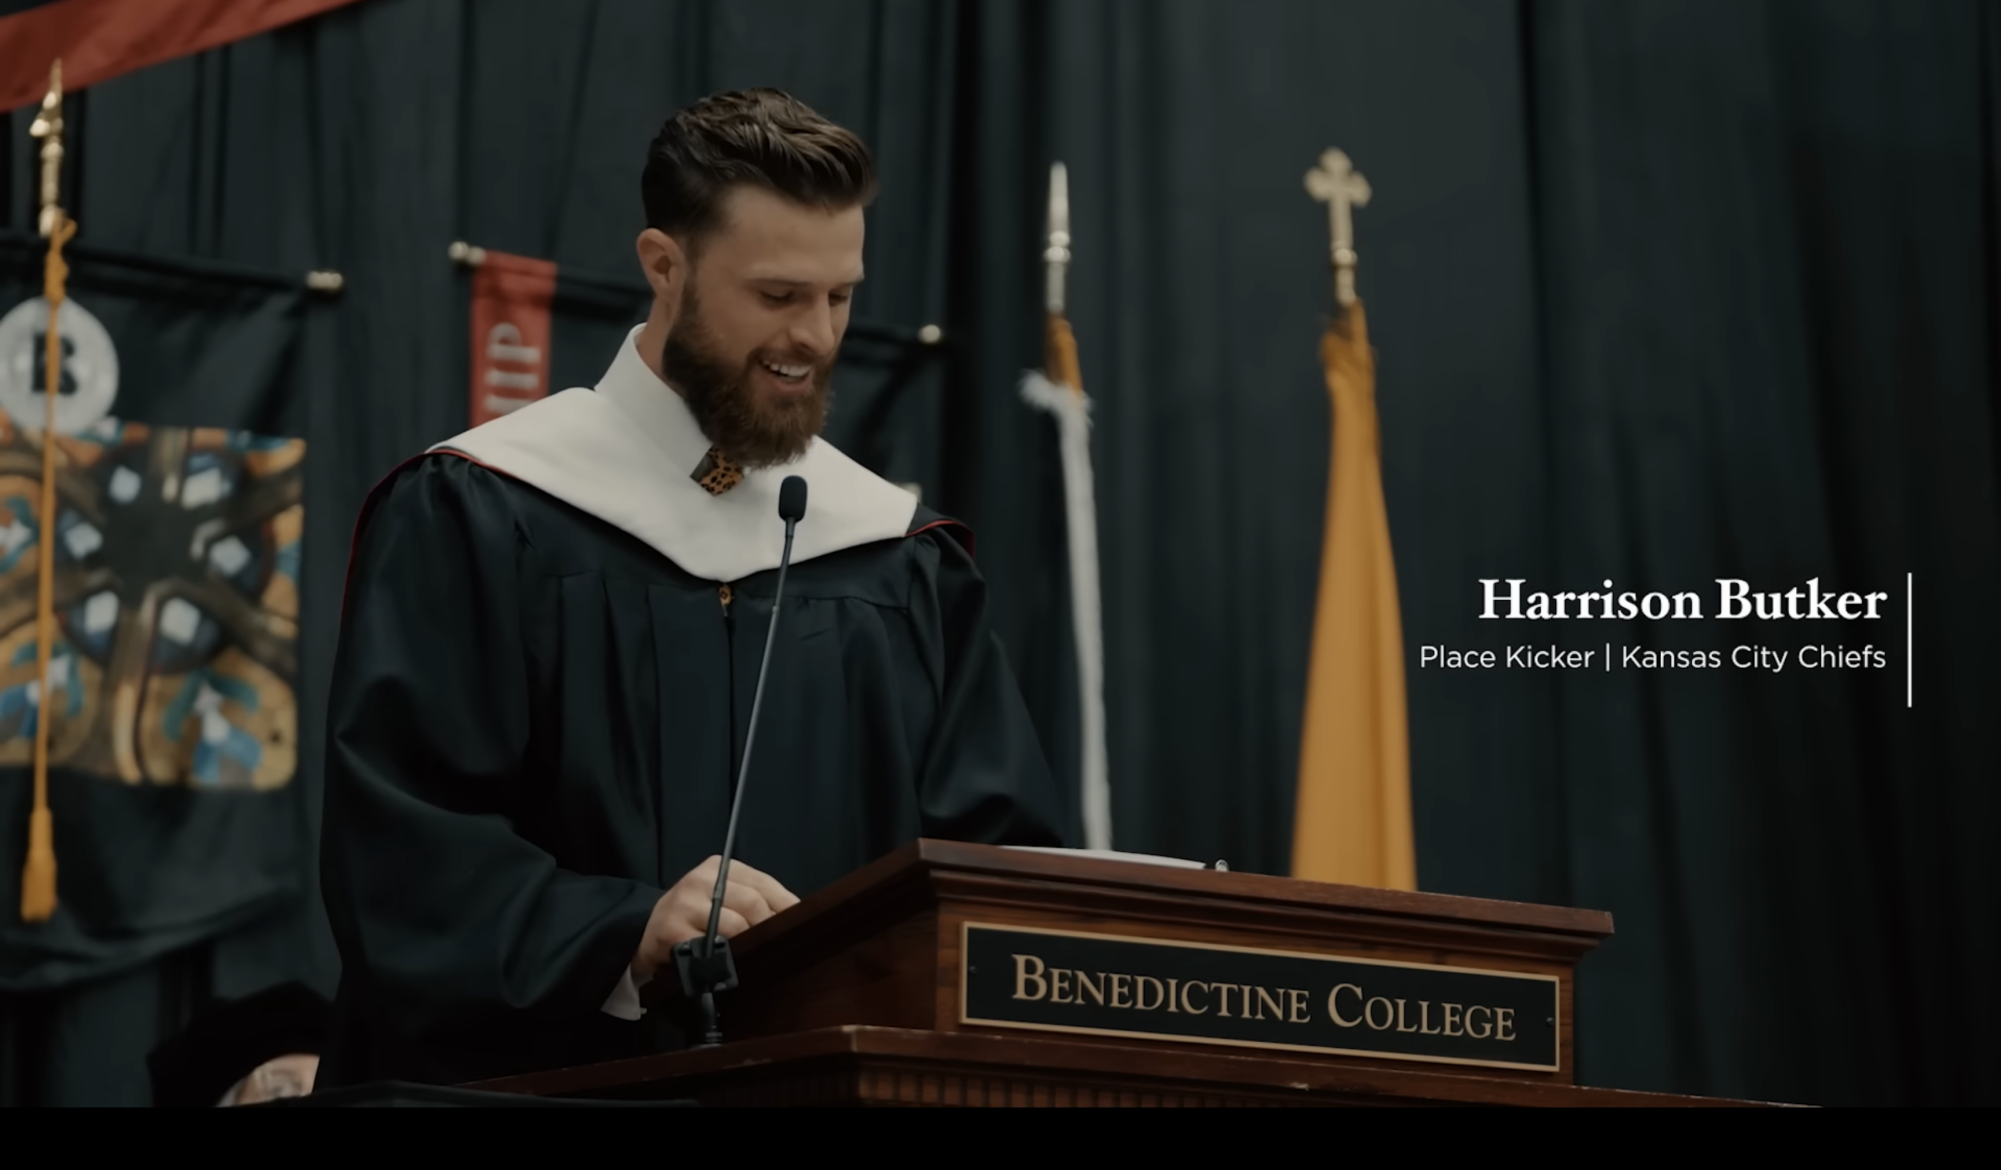 Kicker for the Kansas City Chiefs, Harrison Butker during his 20 minute commencement address May 11. Quarterback for the team, Patrick Mahomes, once said in an interview that he never talks to Butker.